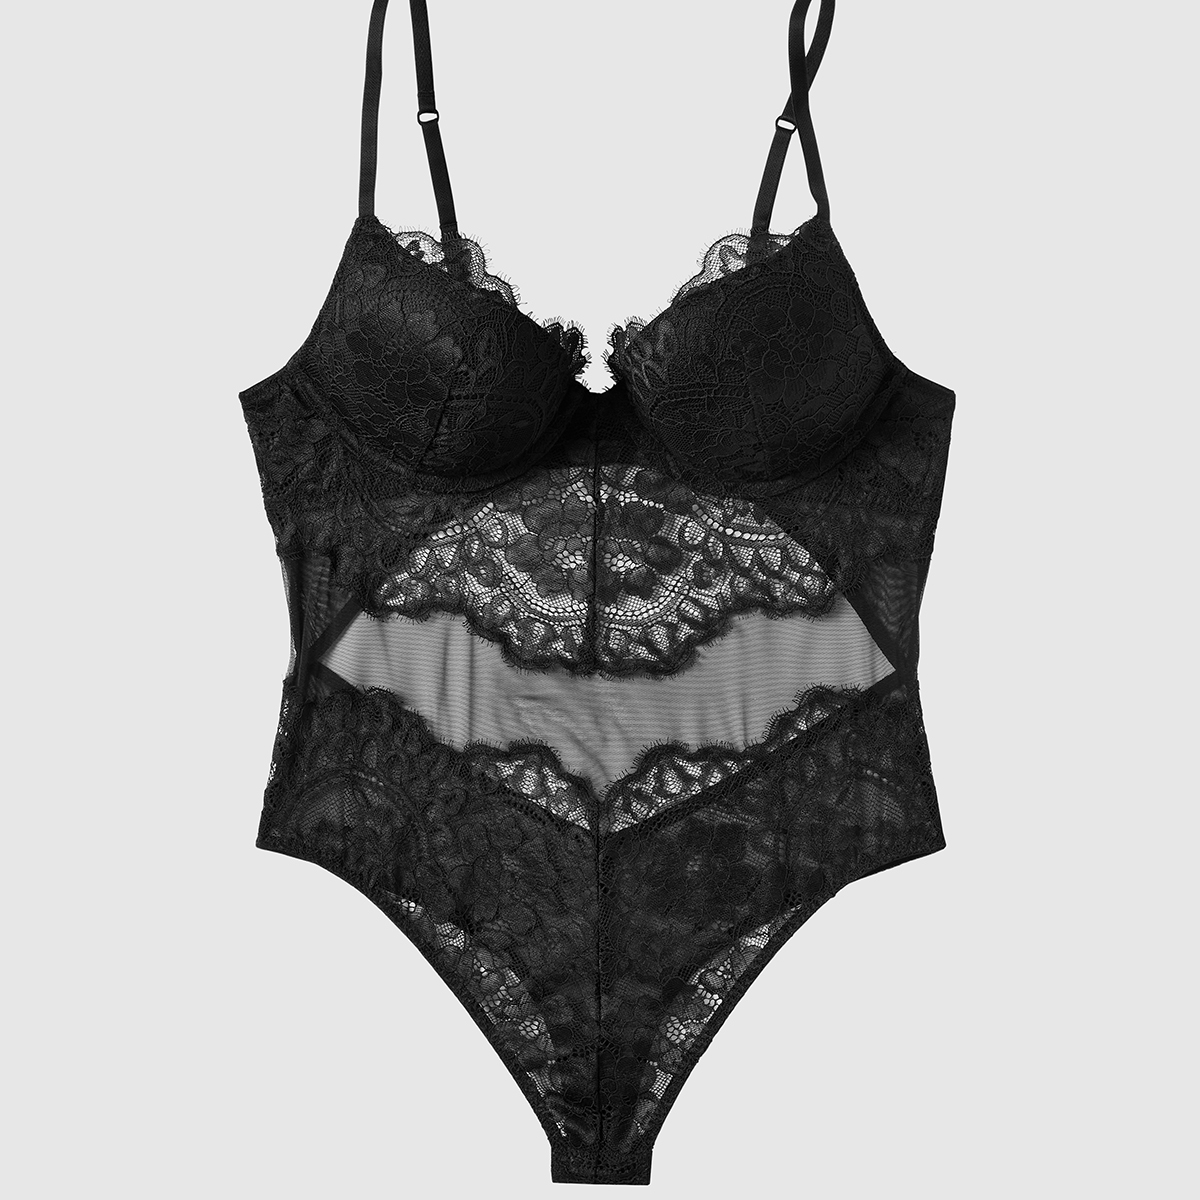 La Senza Middle-East - Is there anything hotter than this Push Up Lace  Bodysuit? Say YES! Bellow! #lasenzame #lingerie #shopping #bodysuit